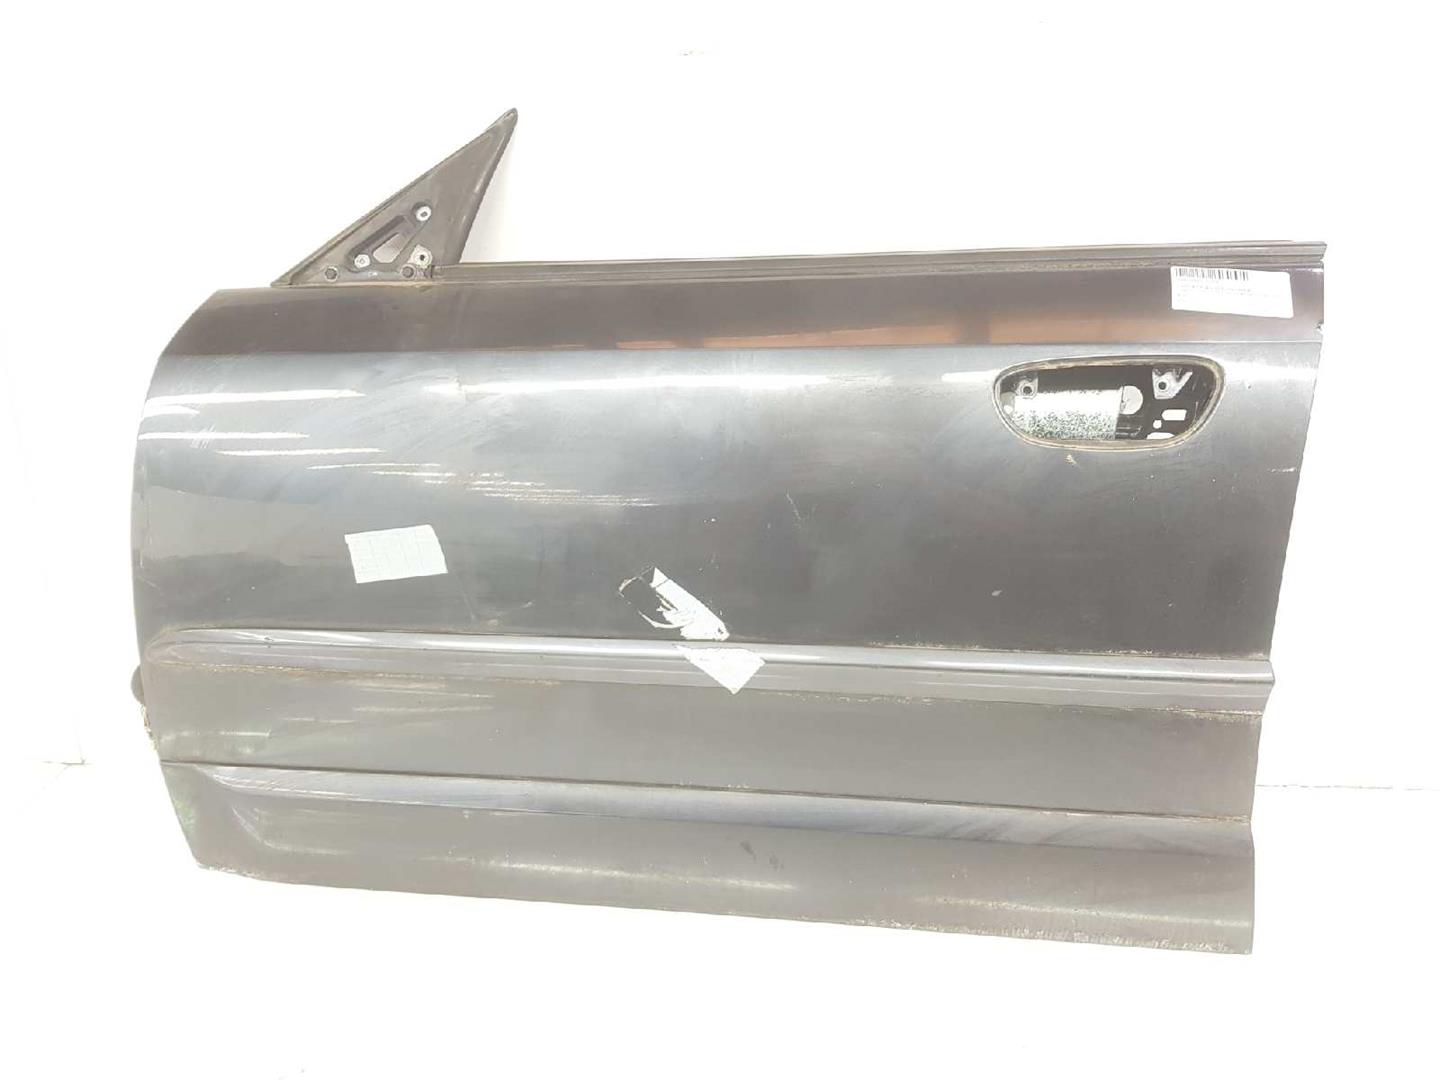 SUBARU Outback 3 generation (2003-2009) Front Left Door 60009AG0729P, 60009AG0729P 24118337